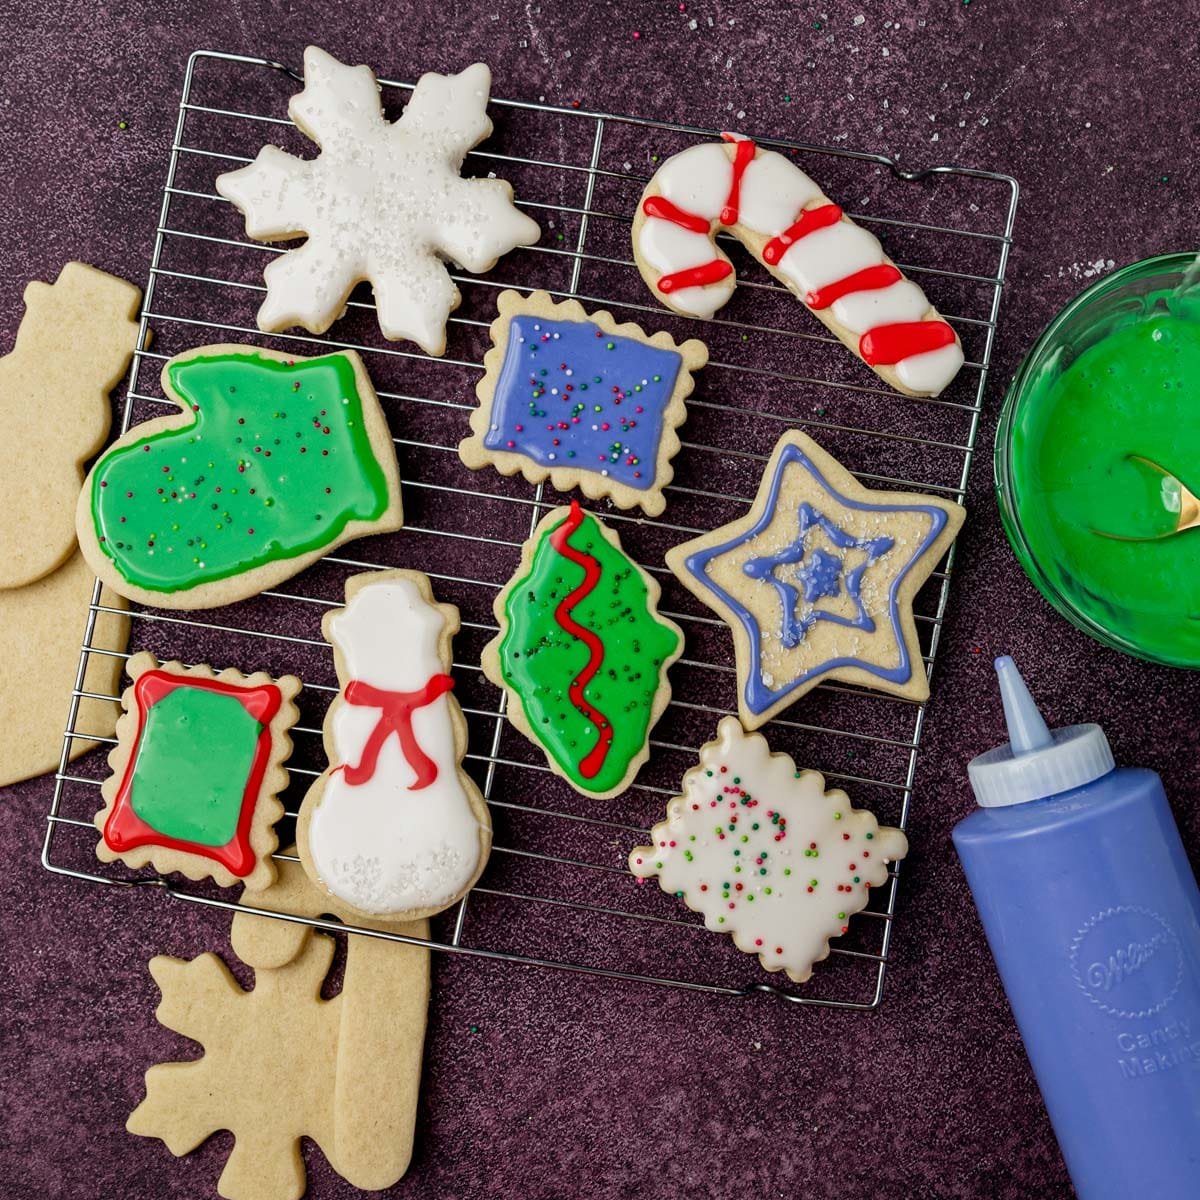 Use Clear Squeeze Bottles for Royal Icing to decorate Cookies